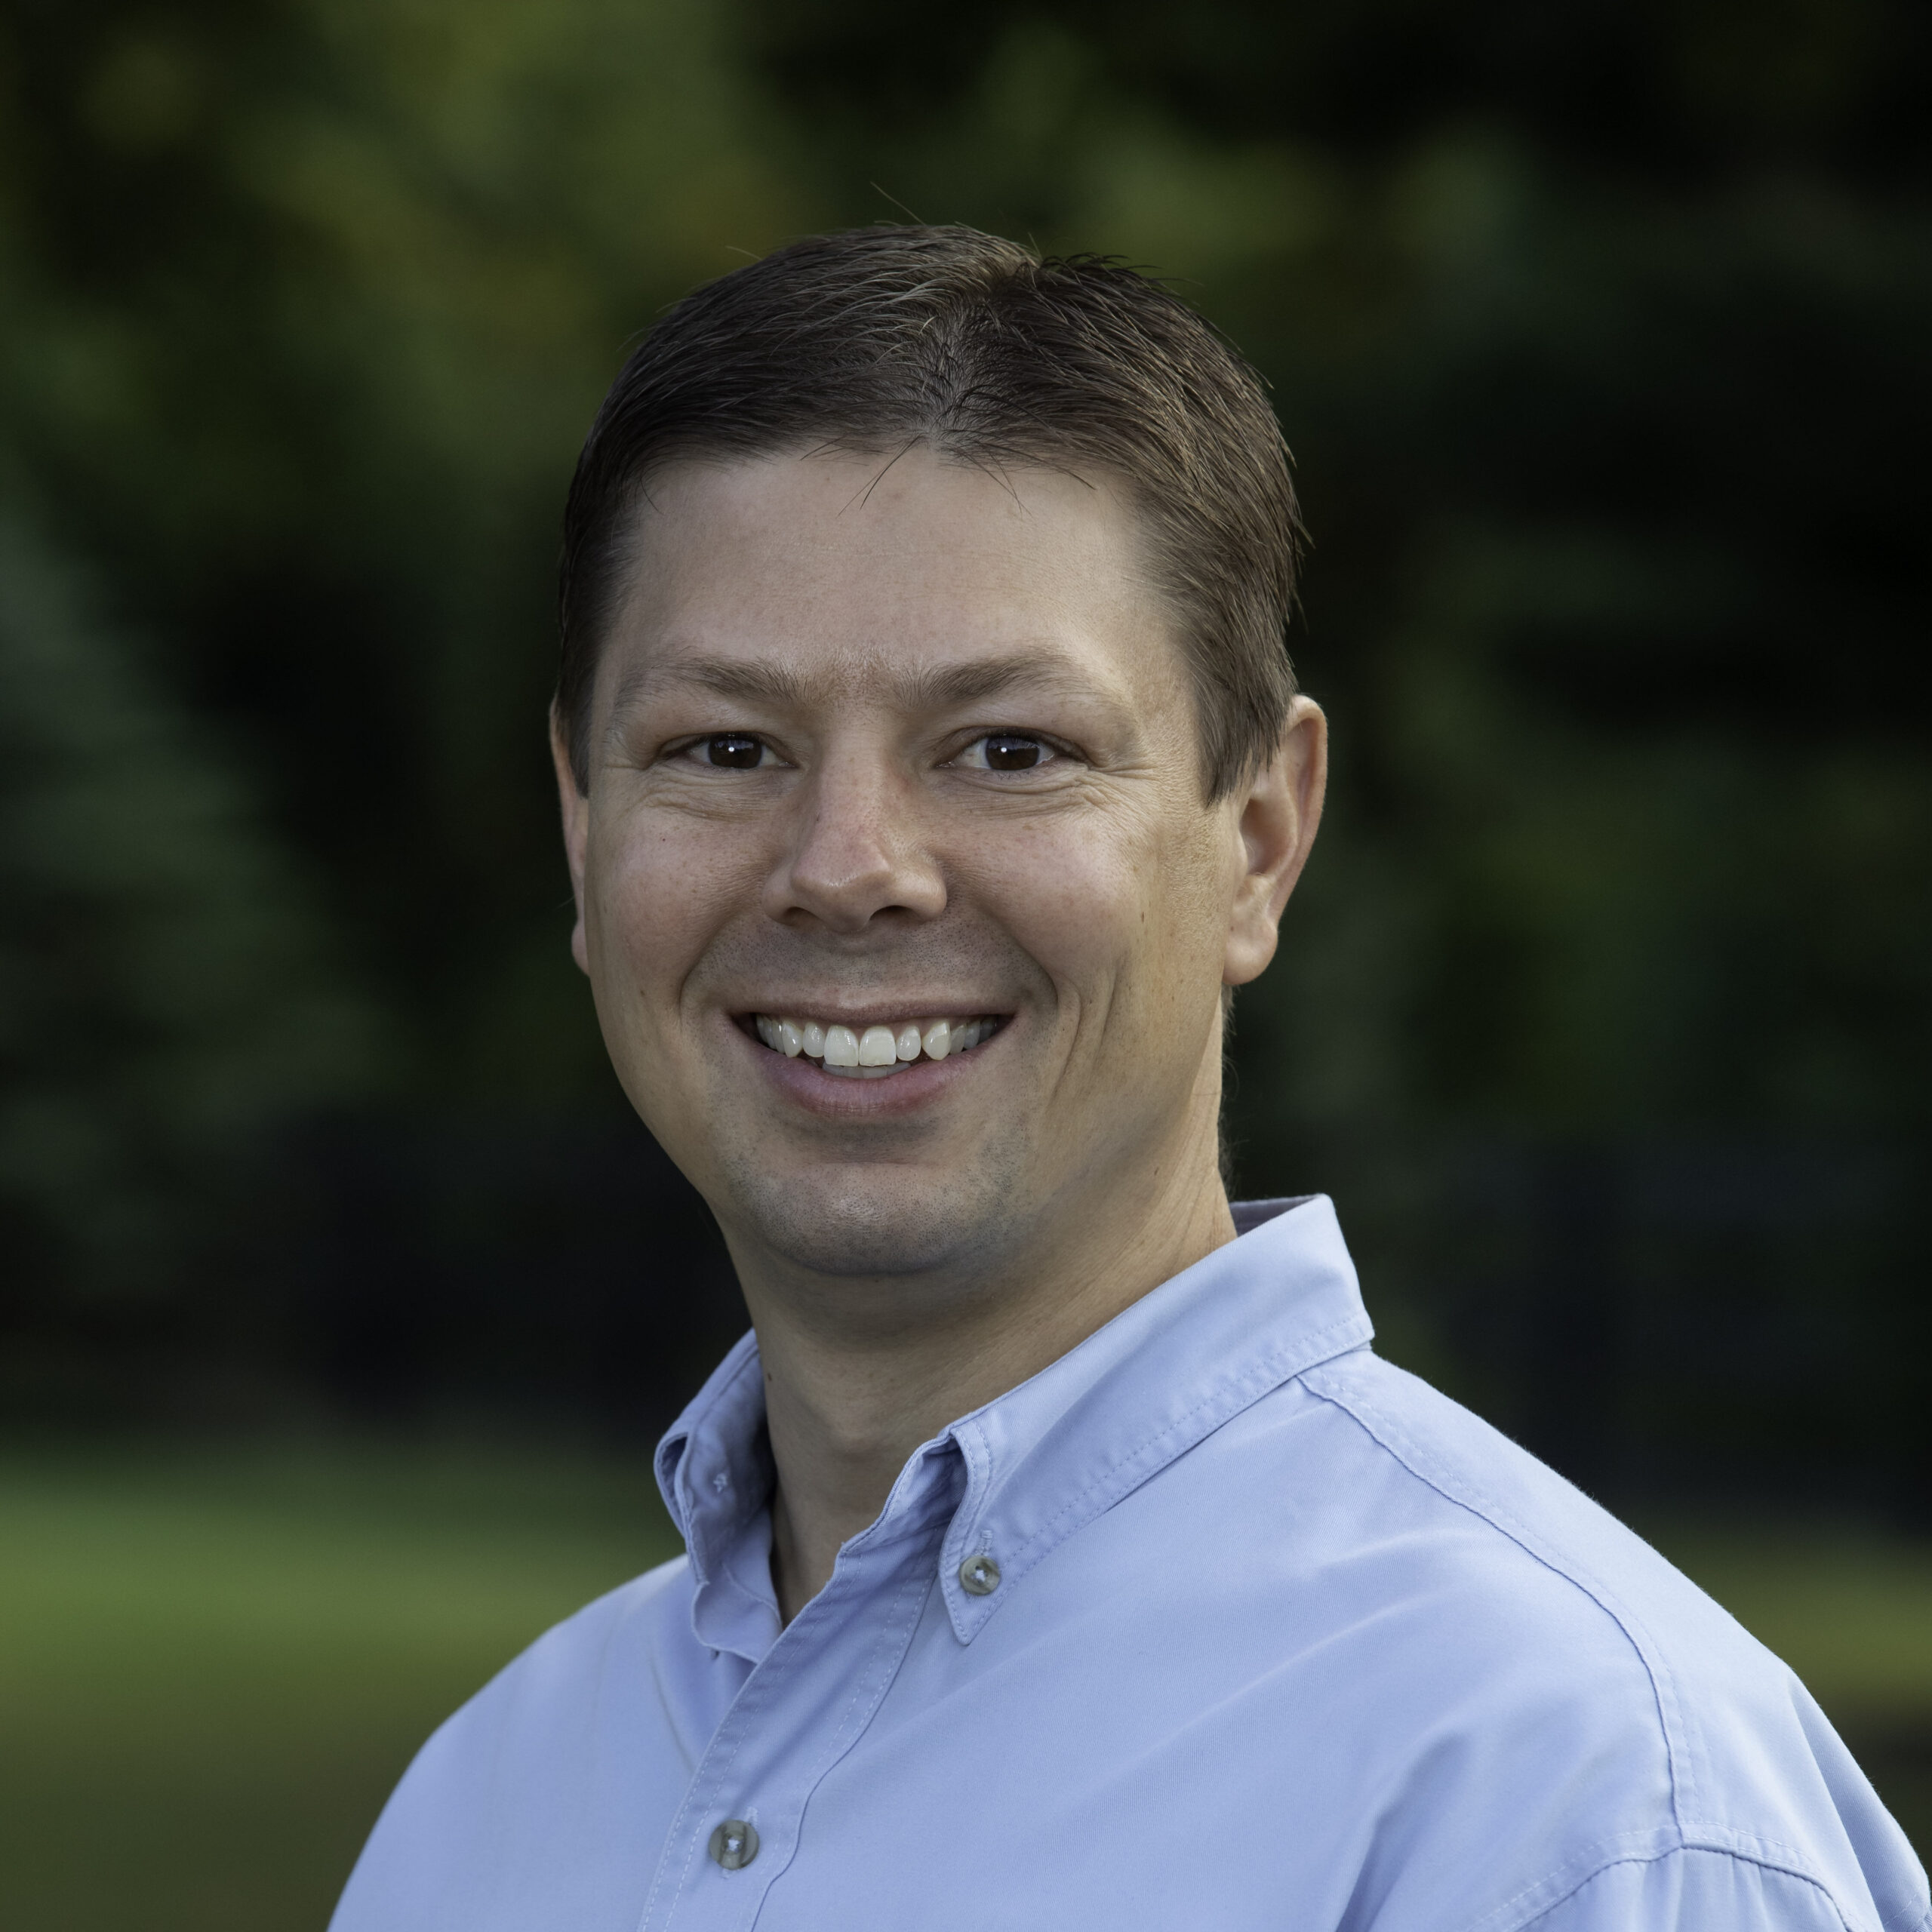 This is a picture of Justin Verst, vice president of quality management and professional civil engineer